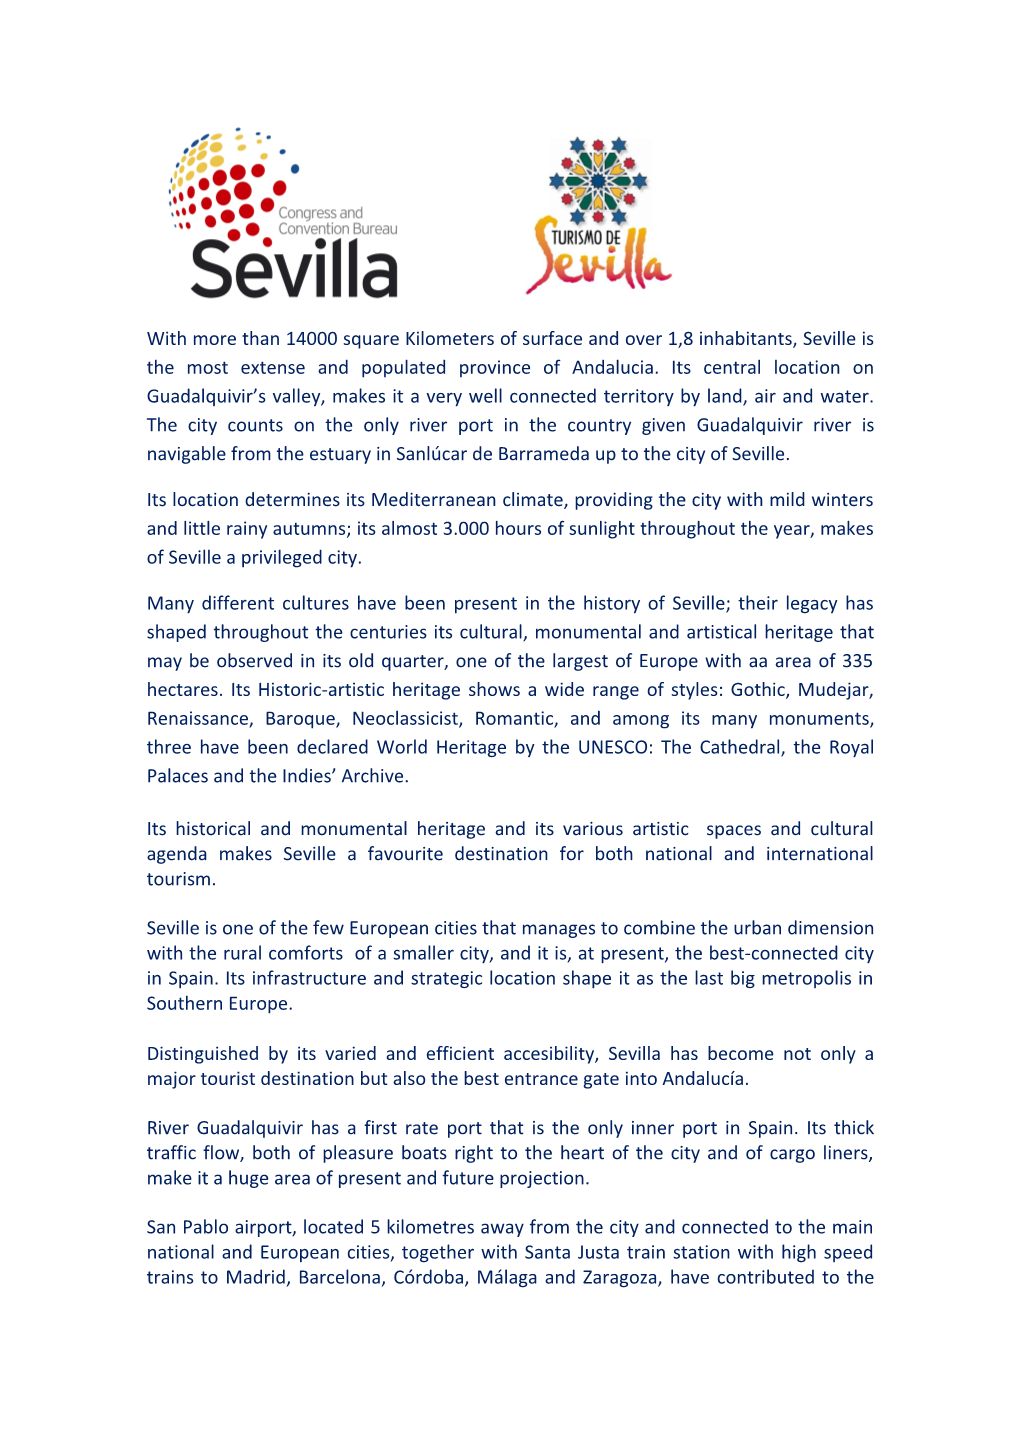 With More Than 14000 Square Kilometers of Surface and Over 1,8 Inhabitants, Seville Is